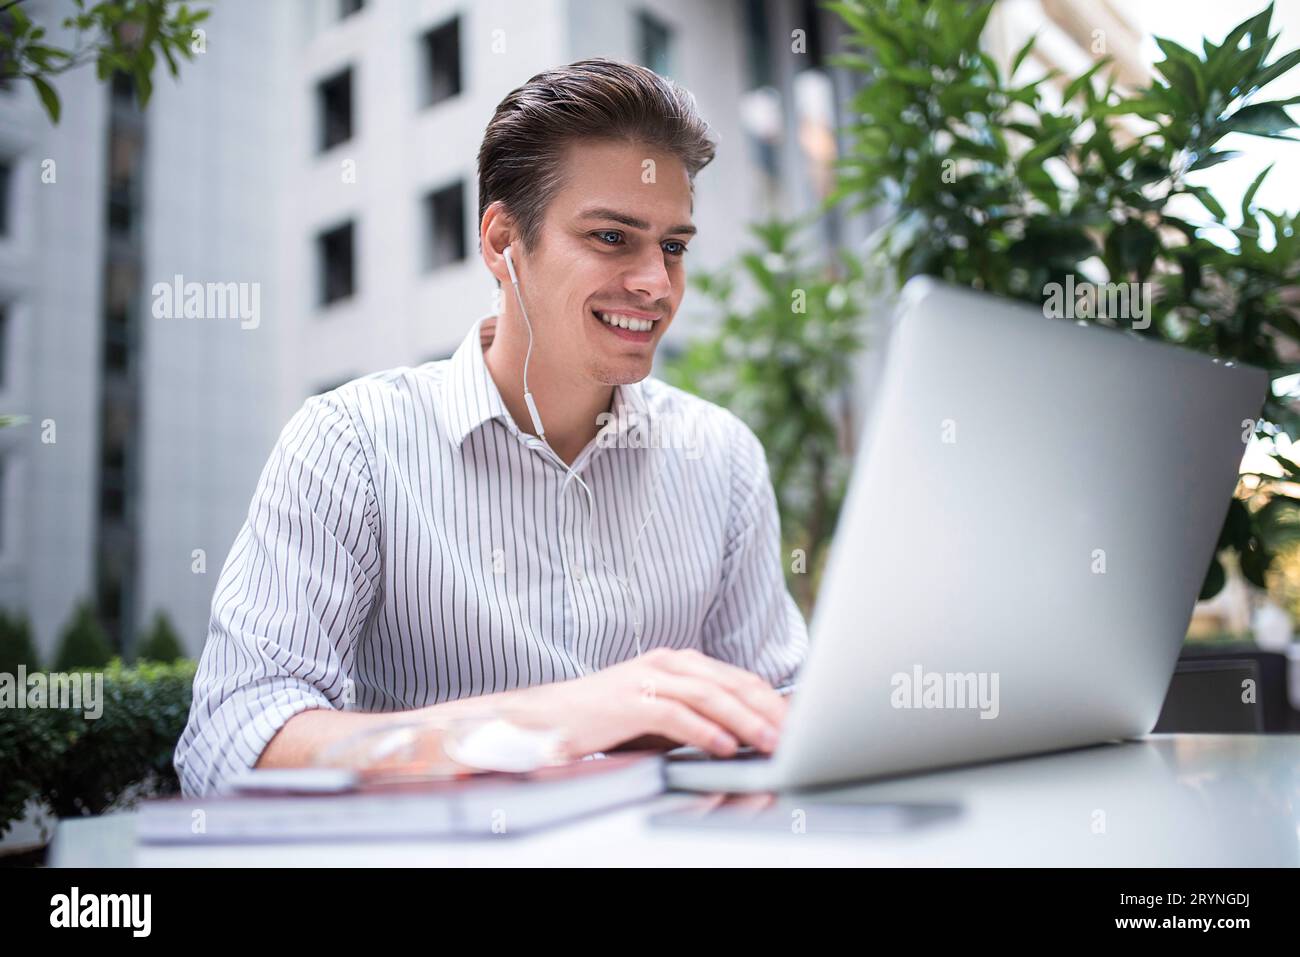 Smart attitude. Positive handsome man using a laptop and sitting in the cafe while surfing the internet have a web conference. W Stock Photo